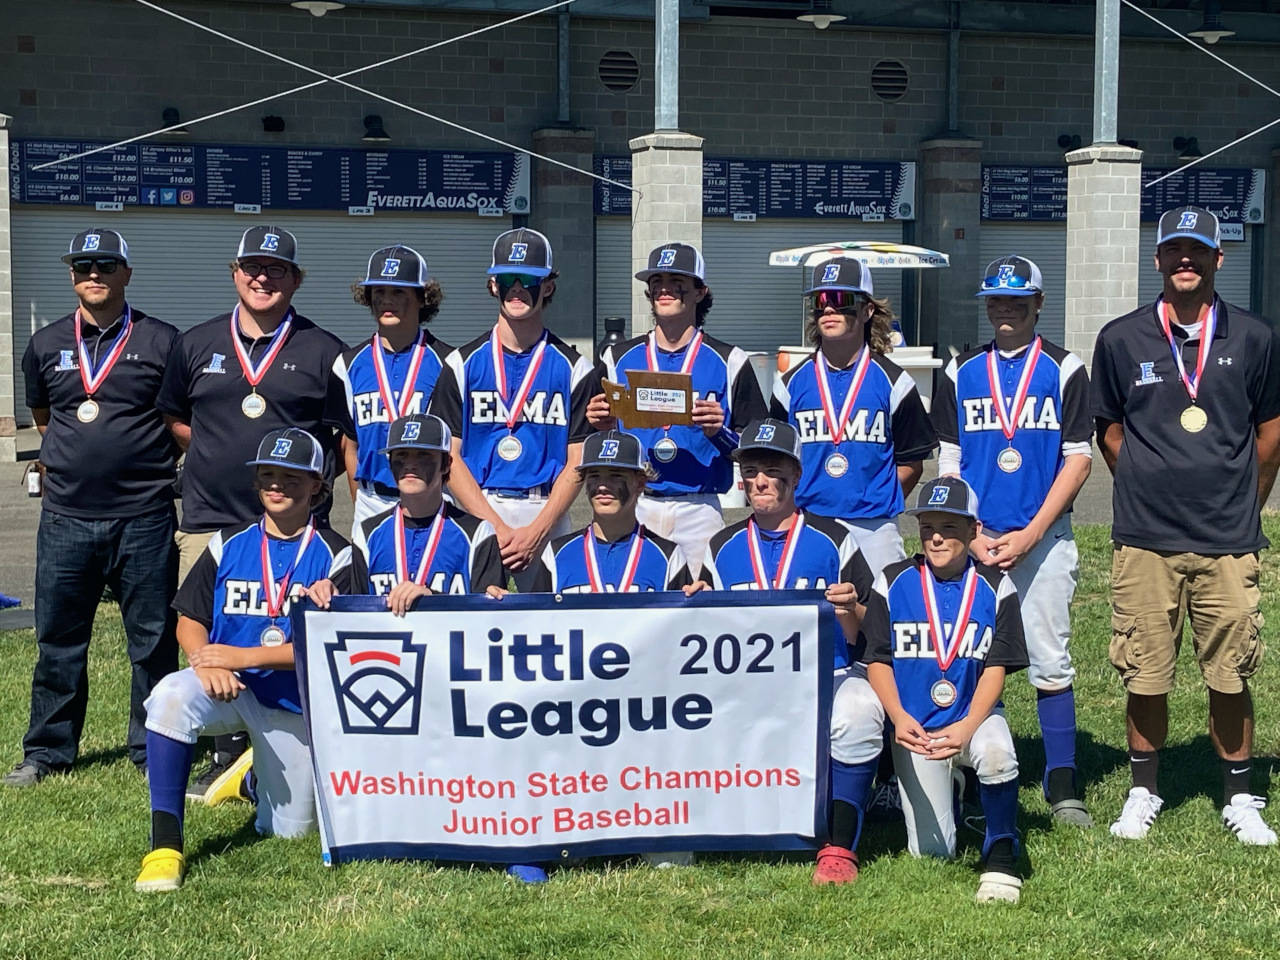 PHOTO BY AMY SPOON The Elma Little League 14-and-under Juniors Division team won a state championship with a 12-5 victory over North Central (Seattle) Little League on Thursday at Funko Field in Everett. Pictured are (back row, from left): Coach Travis Moe, Coach Chazen Hurd, Brody Palmer, Cameron Green, Ethan Camus, Jackson Alexander, Isaac McGafey, Head Coach William McGaffey. Front row (from left): Tanner Moe, Ashton McKinney, TJ Dunlap, Rusty Johnson and Braiden Stewart.